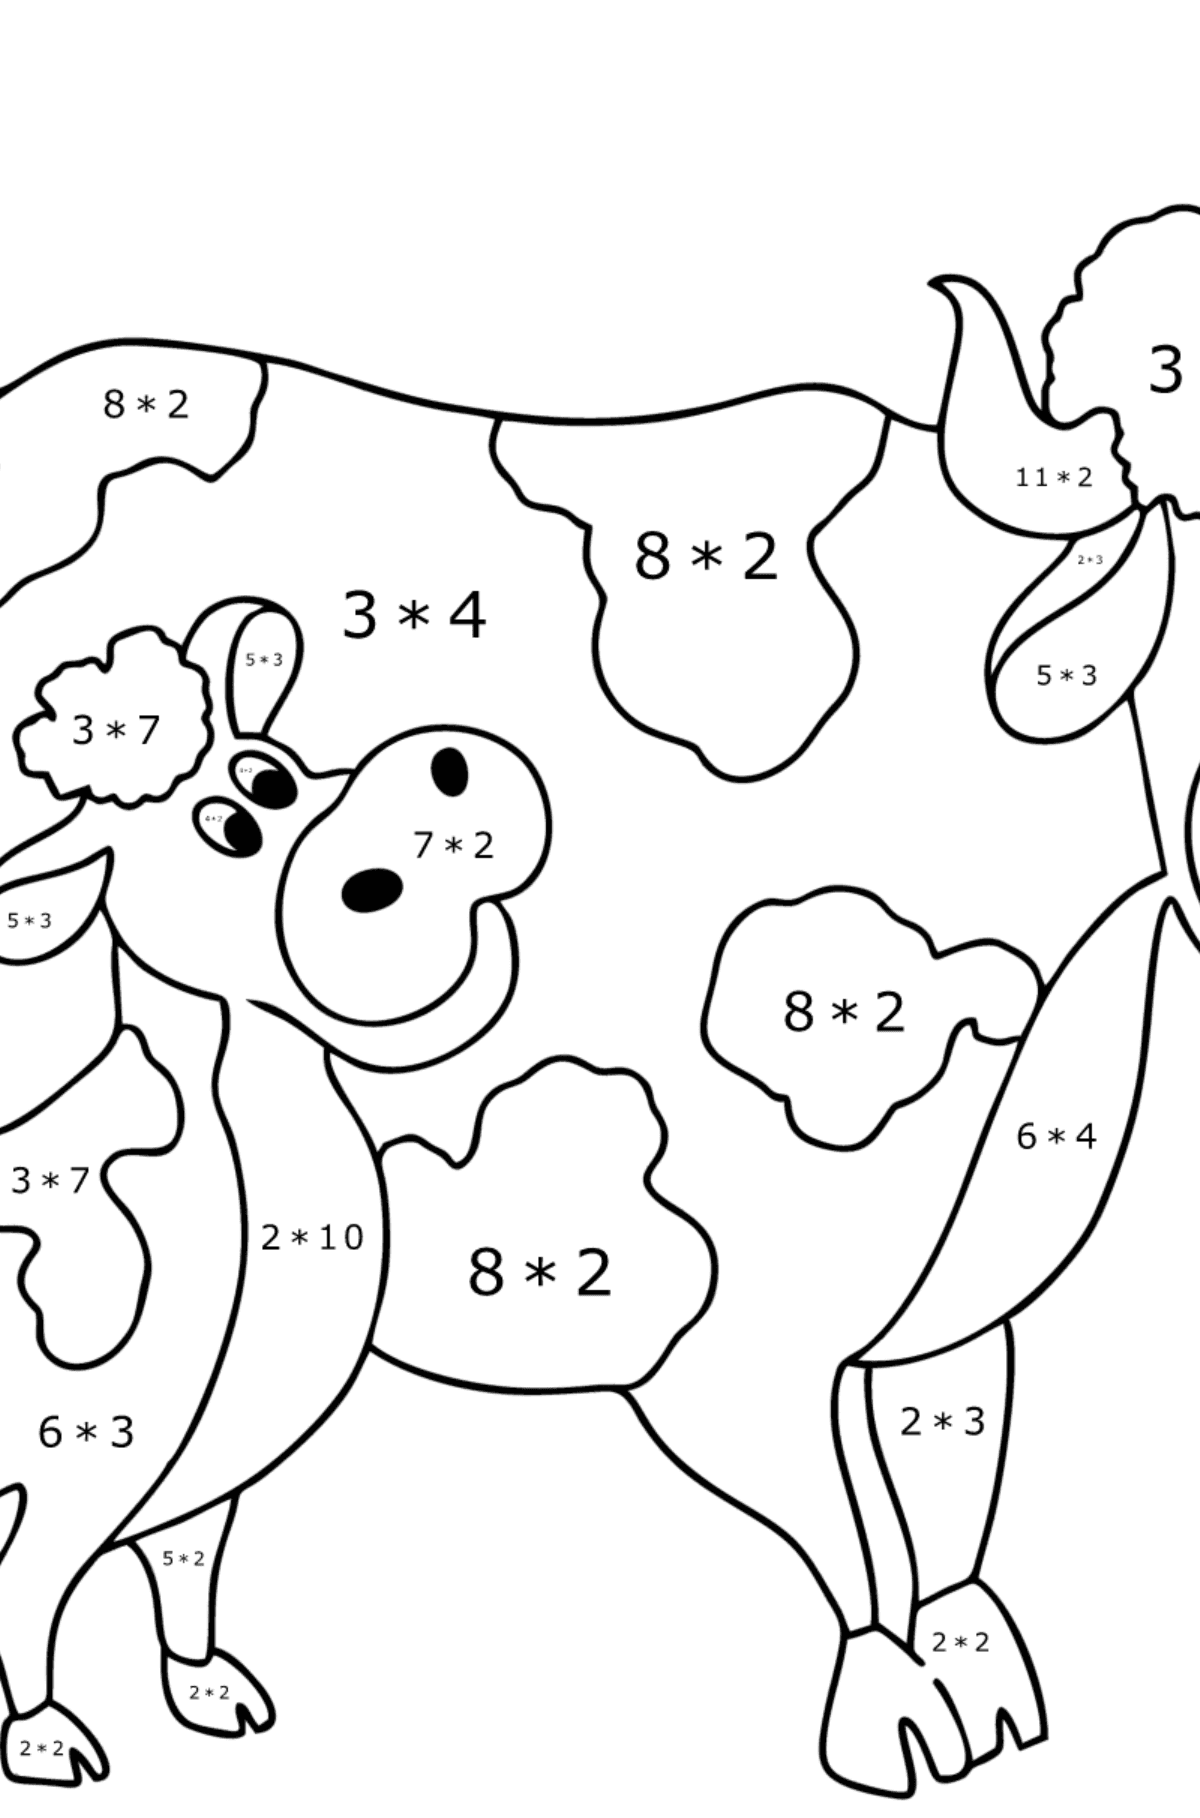 Cow and calf coloring pages - Math Coloring - Multiplication for Kids